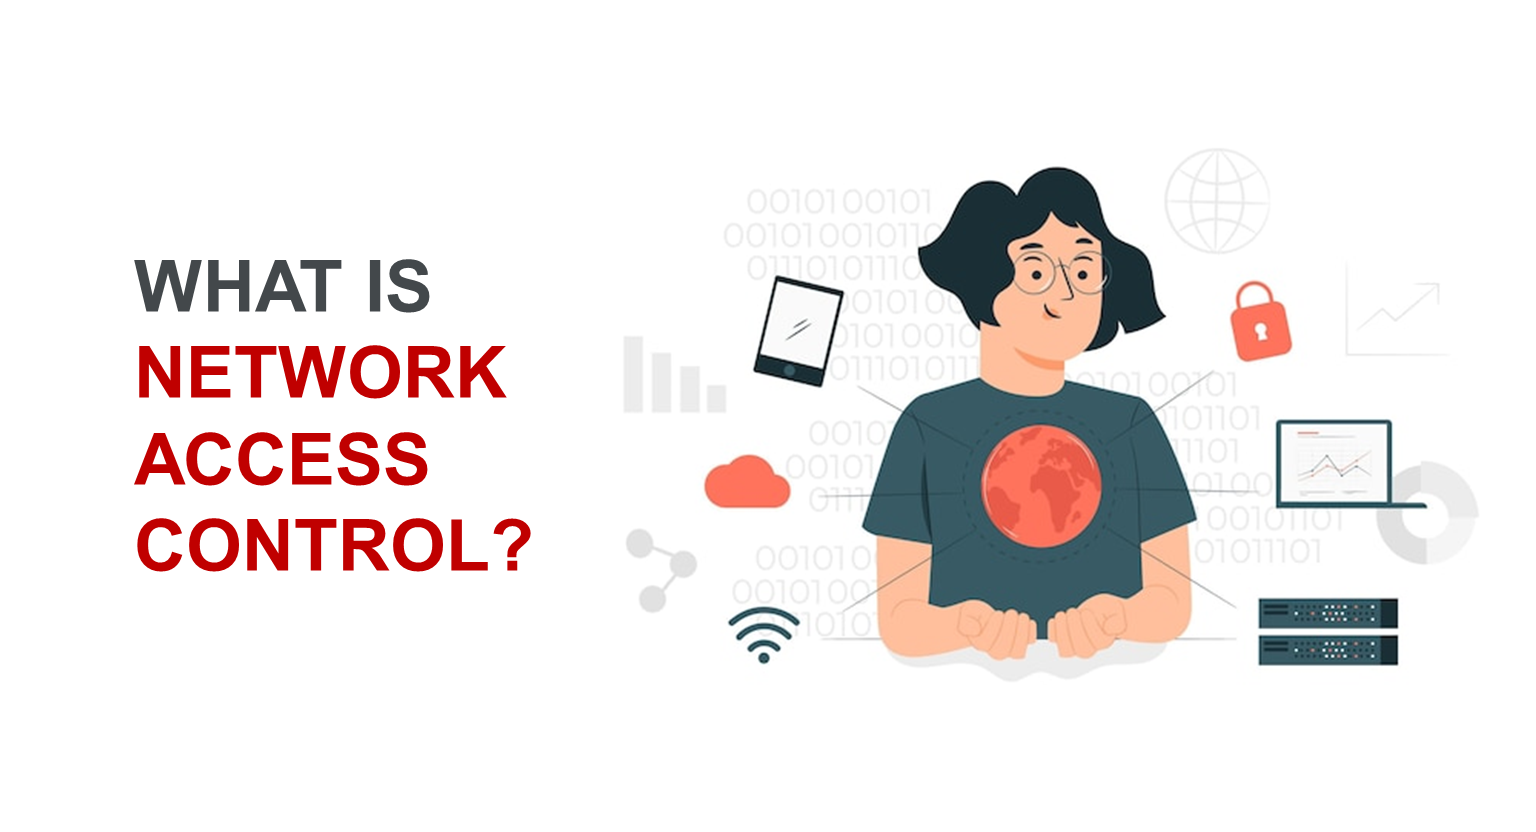 What is Network Access Control?